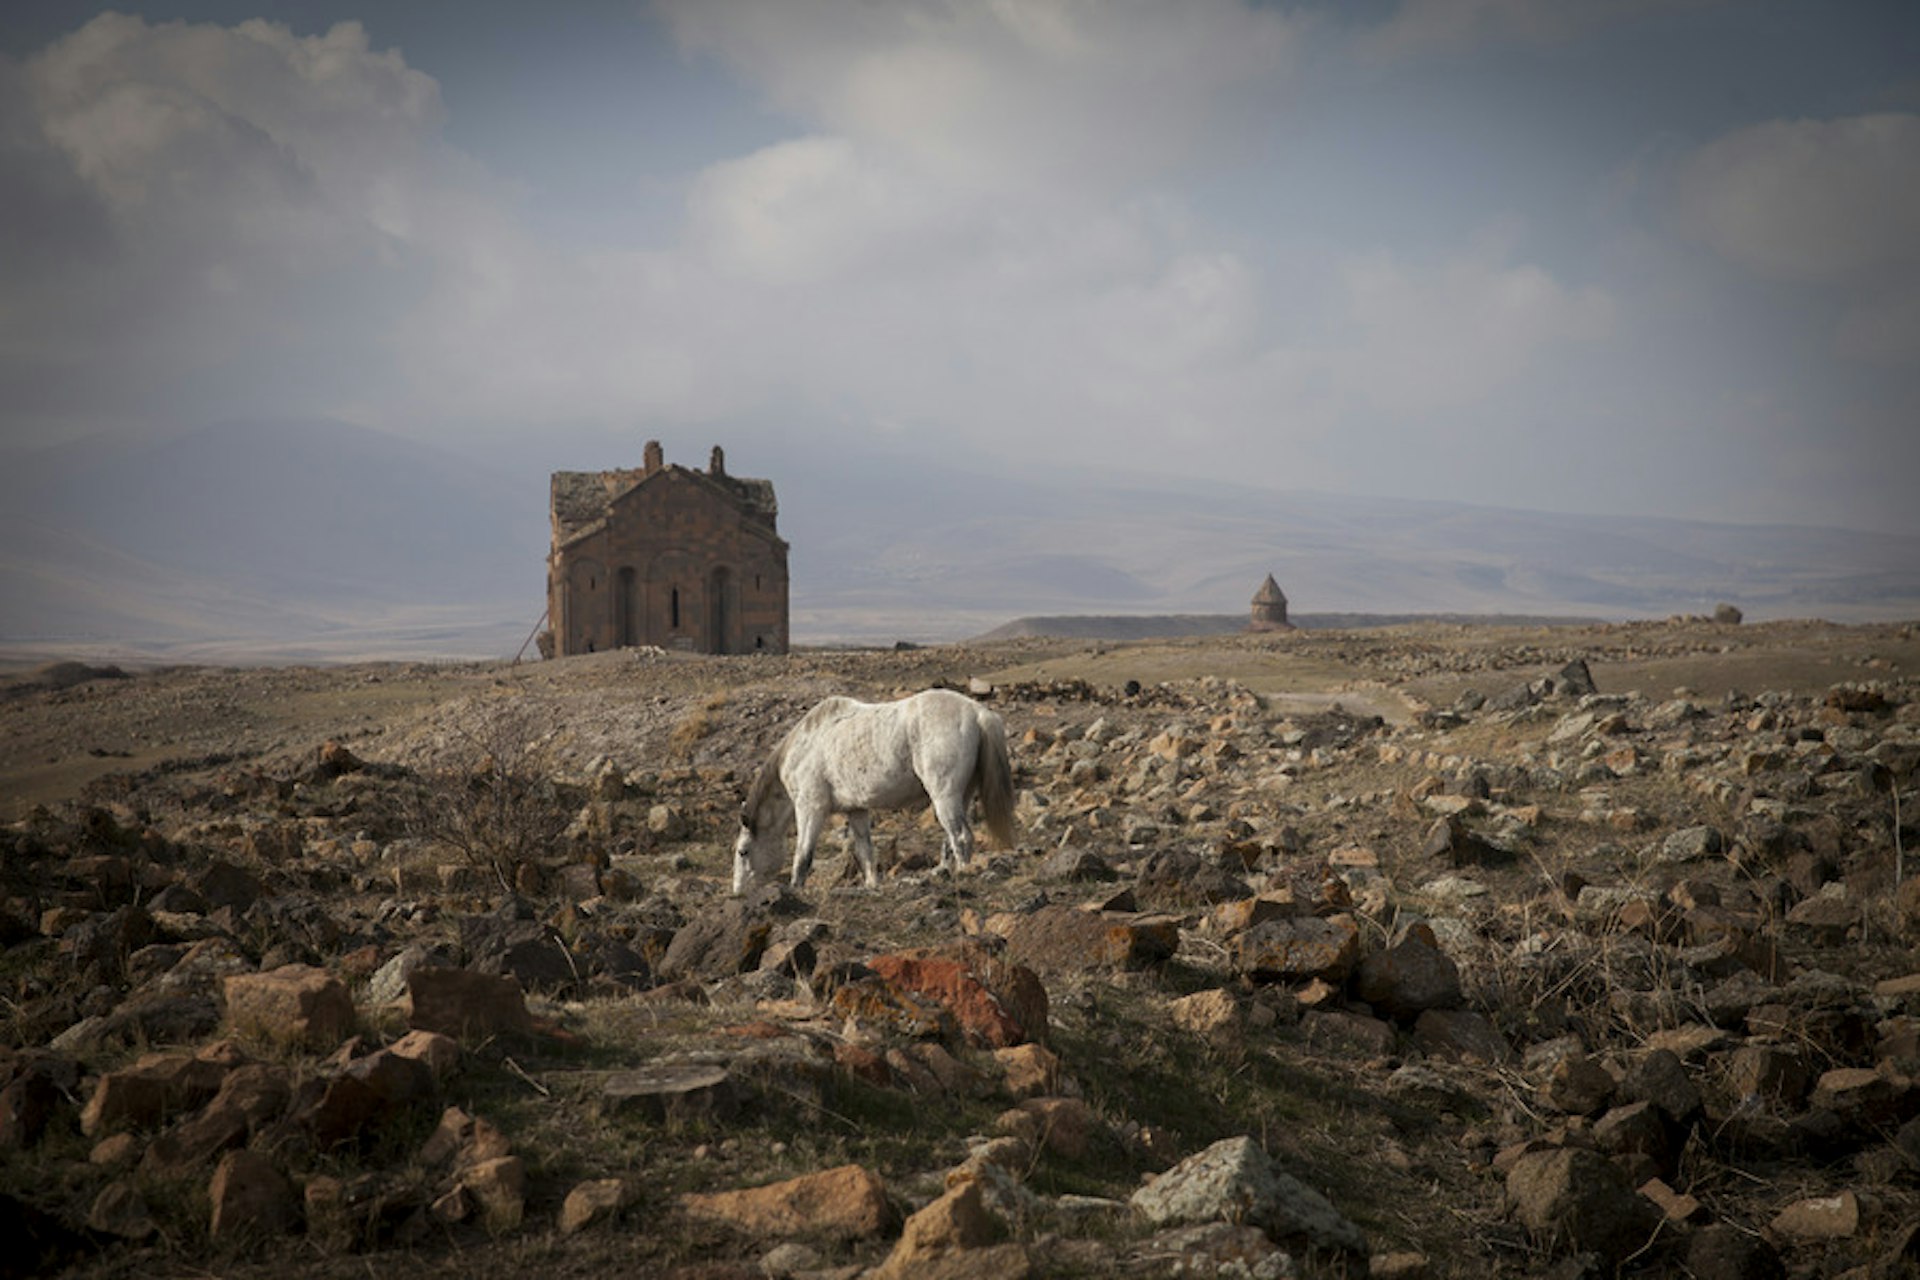 Once the capital of an ancient Armenian Kingdom, Ani, was known as the "city of 1,001 churches." After the genocide, Turkey cut Armenia from its history, with no mention of who built or inhabited it. Today, the city remains abandoned, apart from the occasional presence of Turkish border guards.